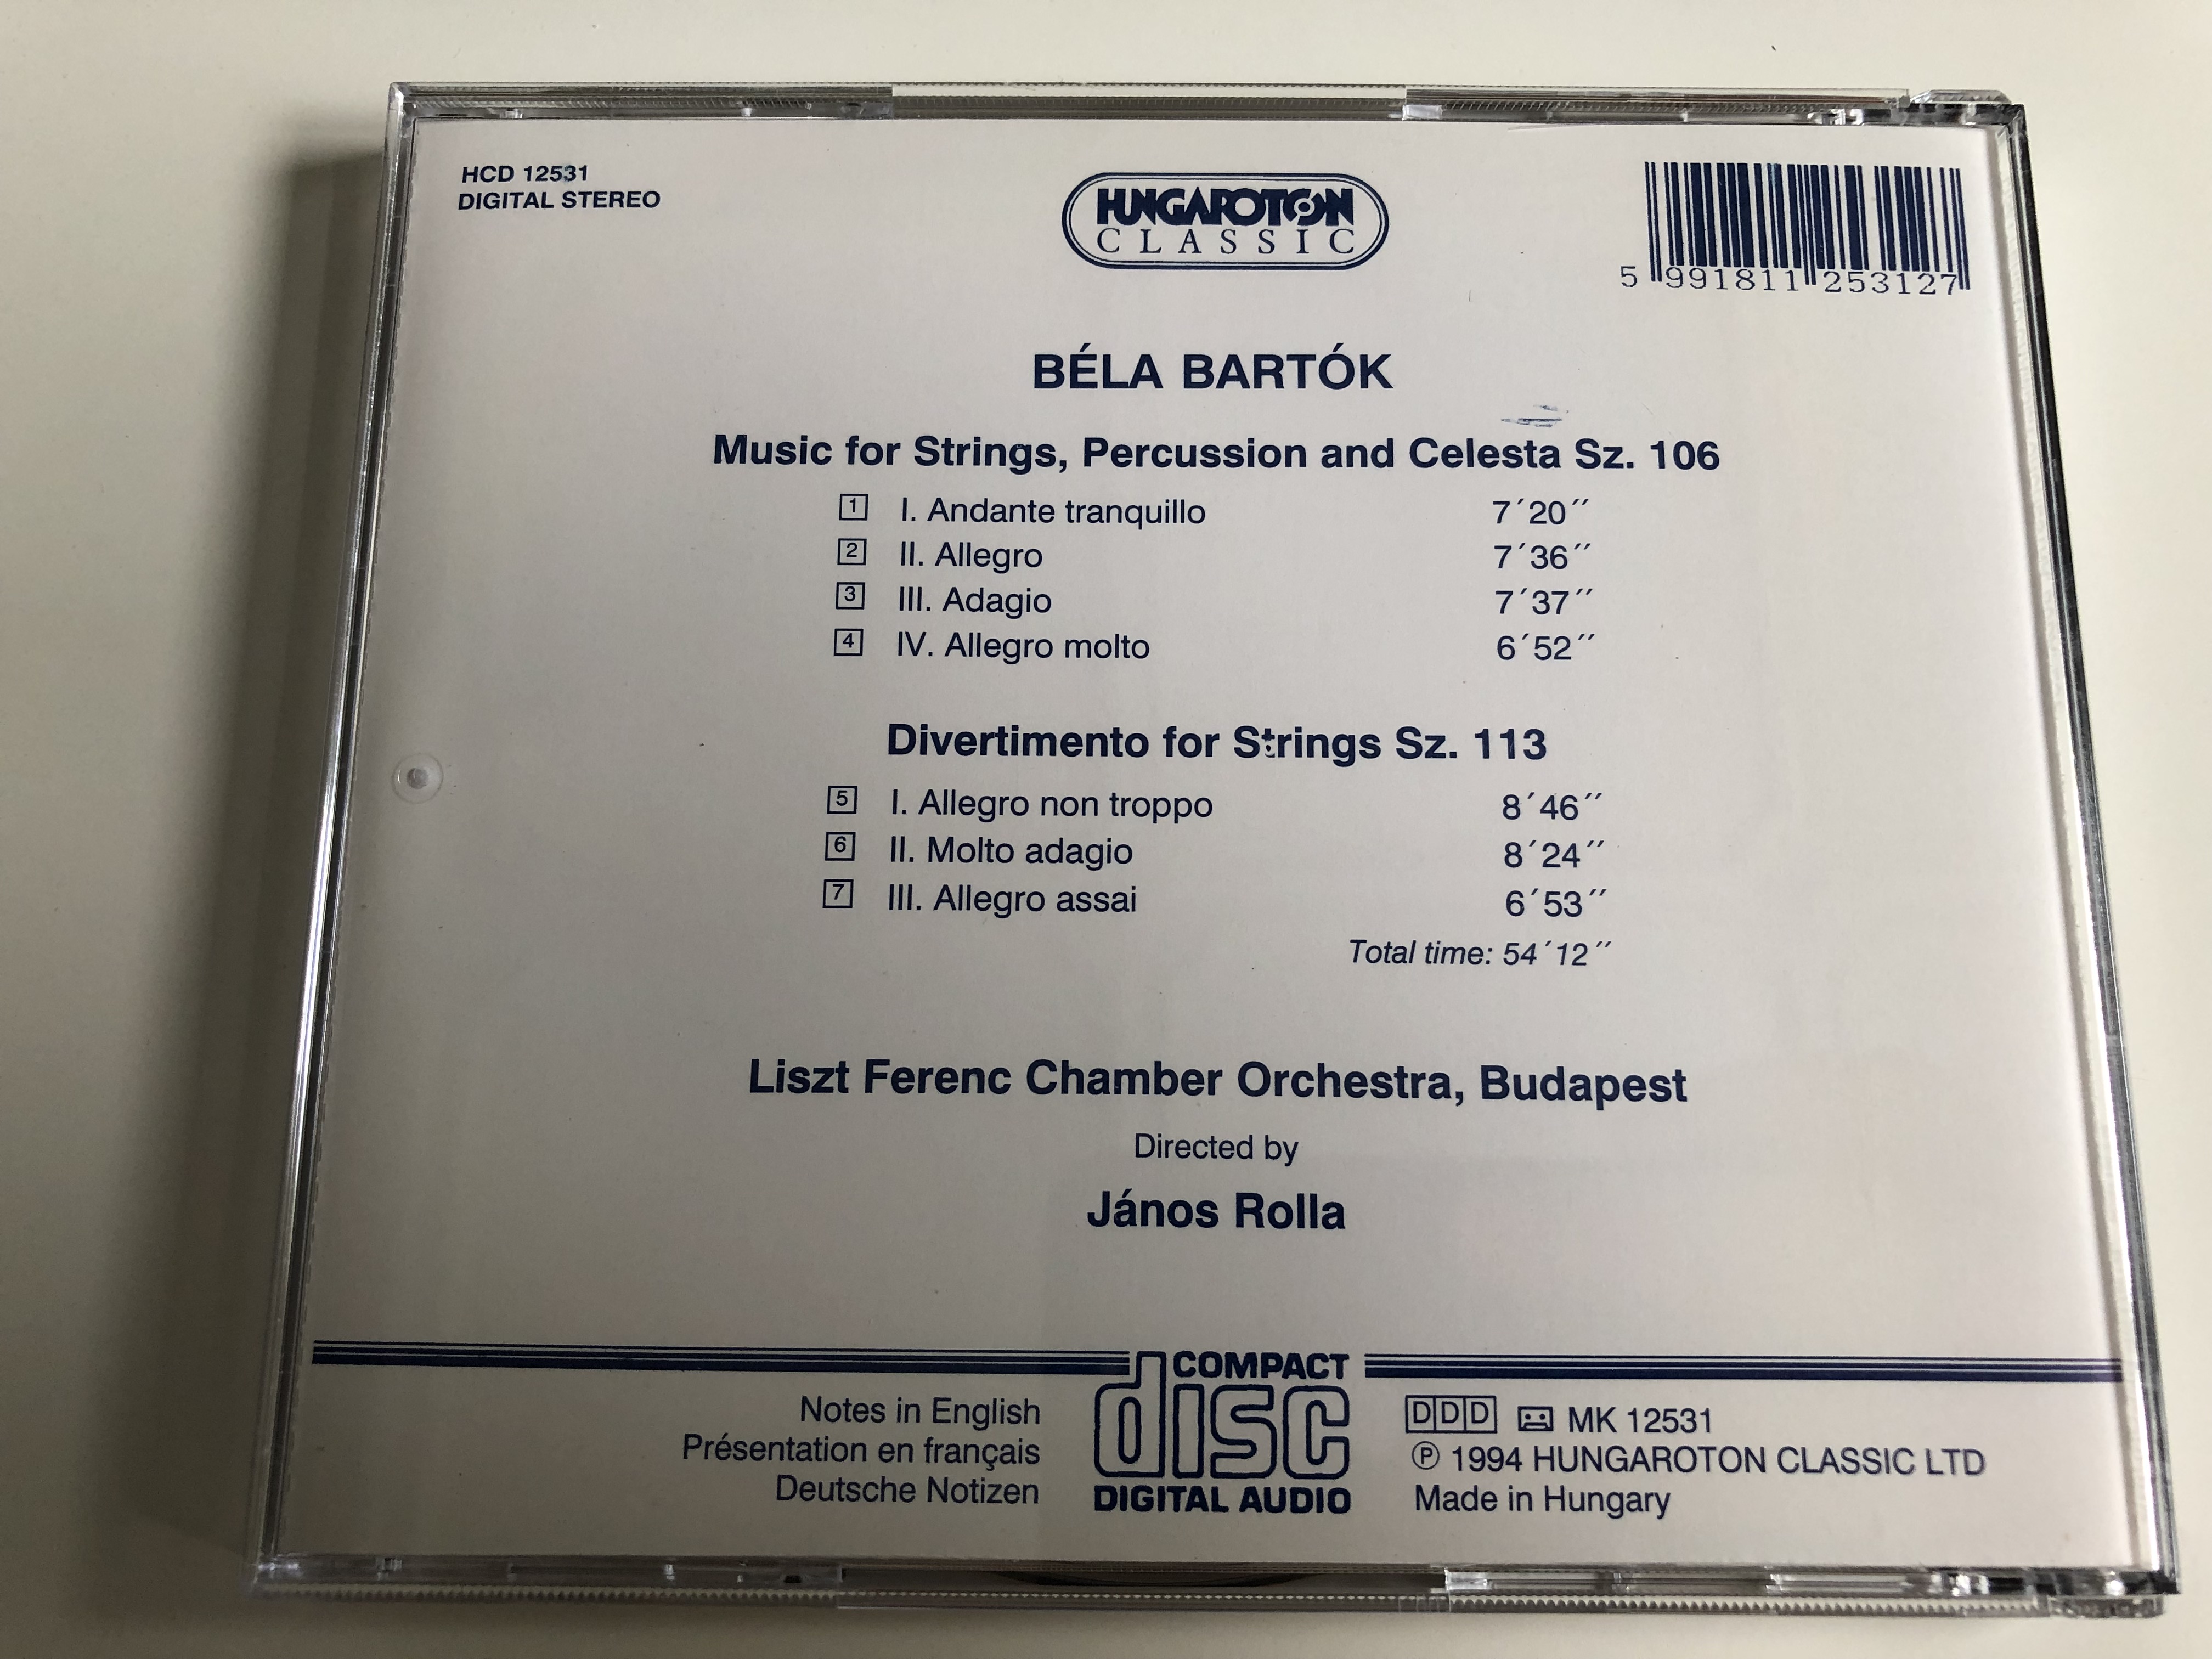 bart-k-music-for-strings-percussion-and-celesta-divertimento-liszt-ferenc-chamber-orchestra-budapest-conducted-by-j-nos-rolla-hungaroton-classic-hcd-12531-2-audio-cd-1994-9-.jpg